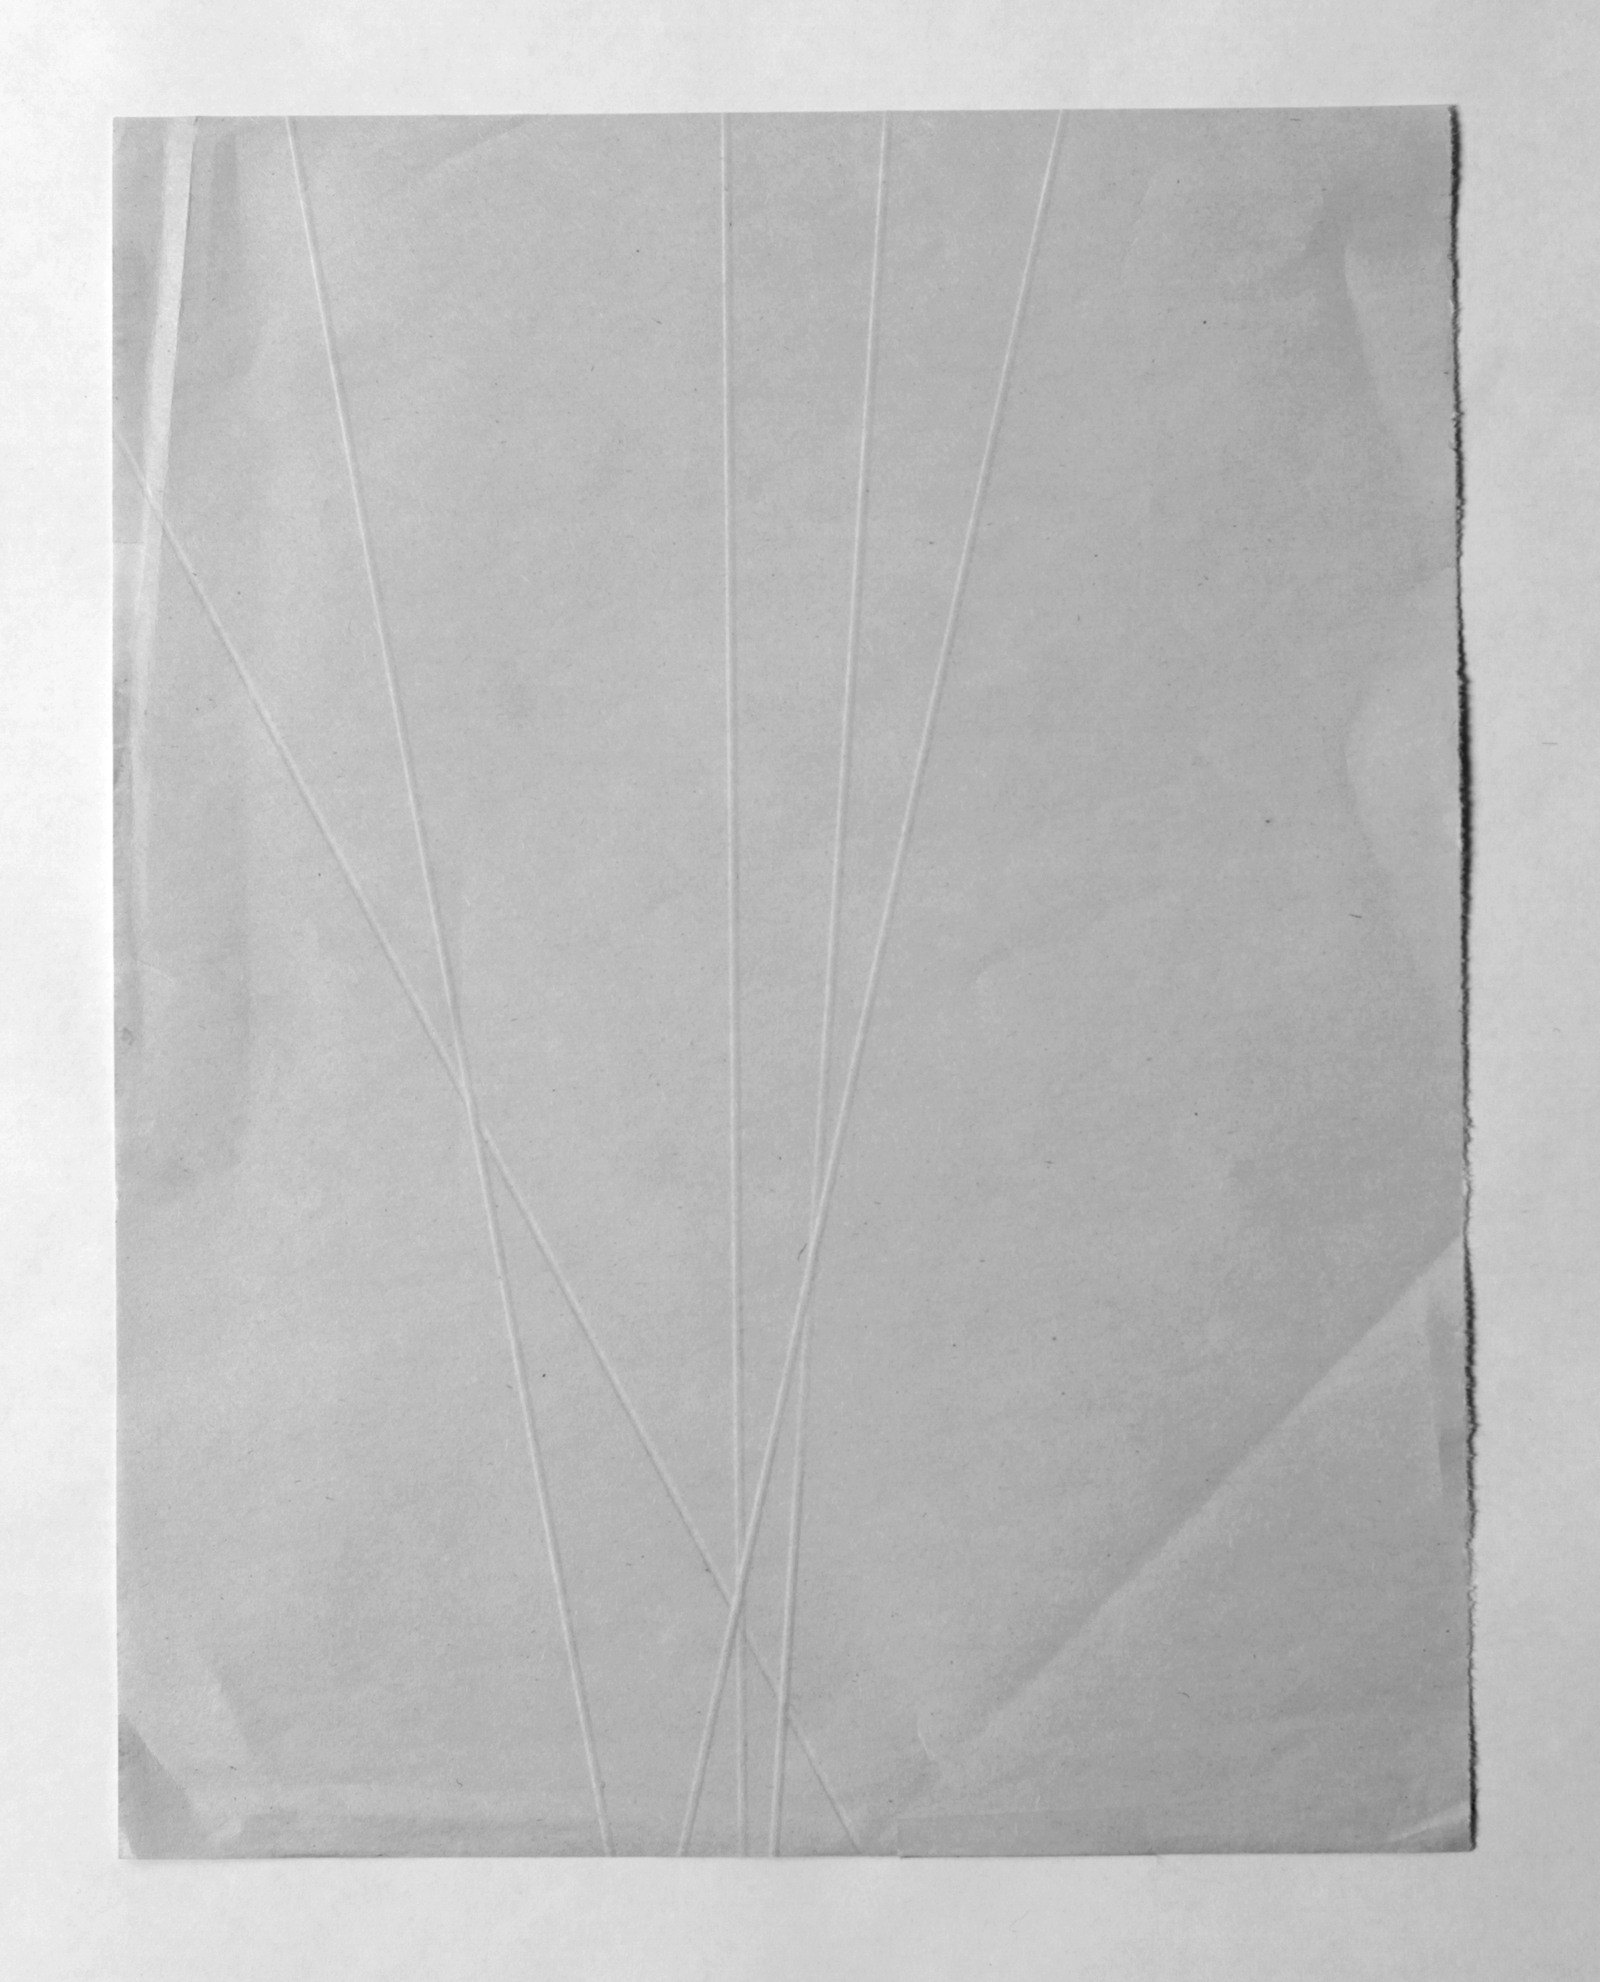   from the ongoing series: O/, Divided/Defined, Weights, Measures, and Emotional Geometry  2013, Folded newsprint. 8 x 10 inches folded 